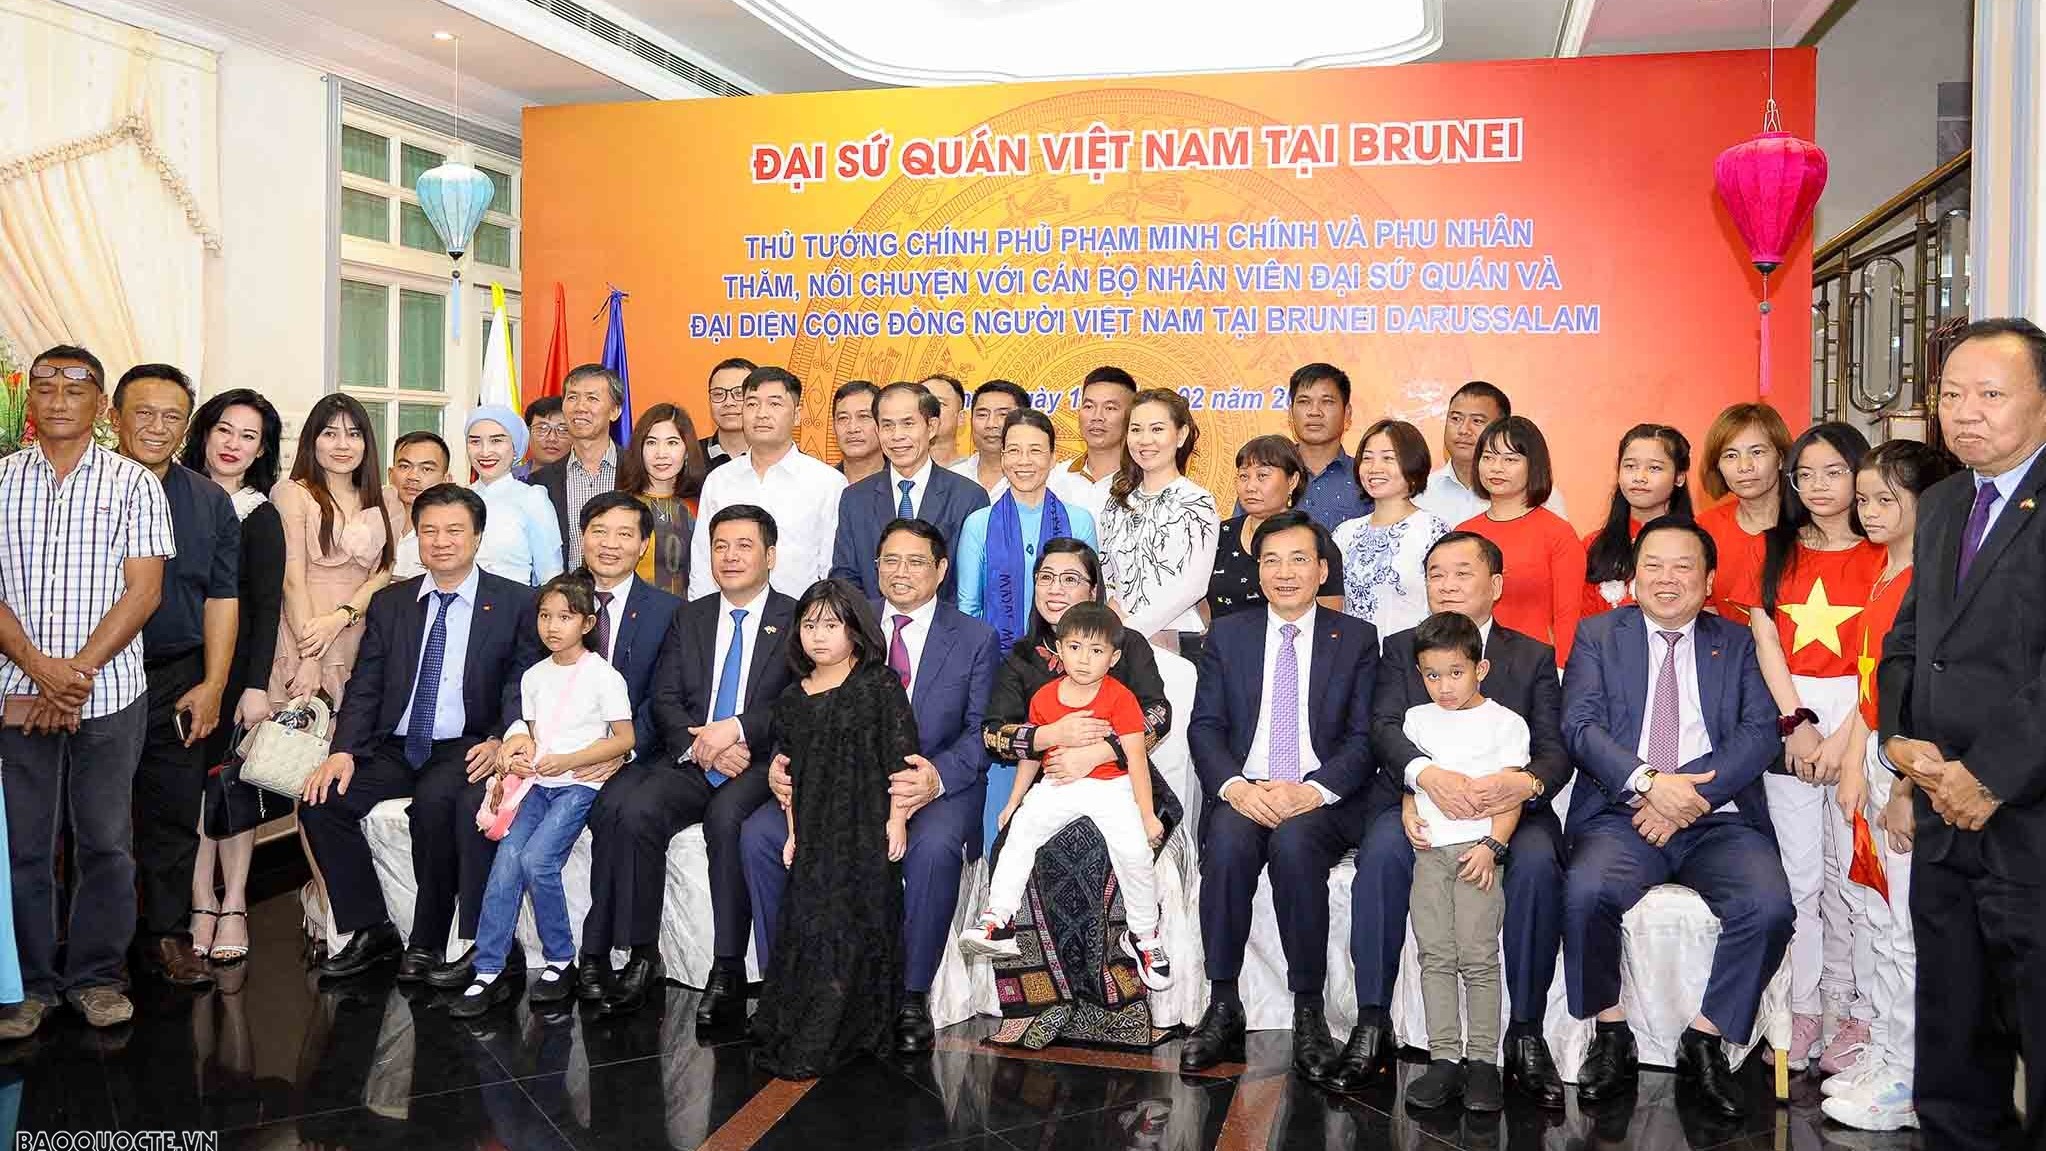 Prime Minister Pham Minh Chinh meets Vietnamese community in Brunei